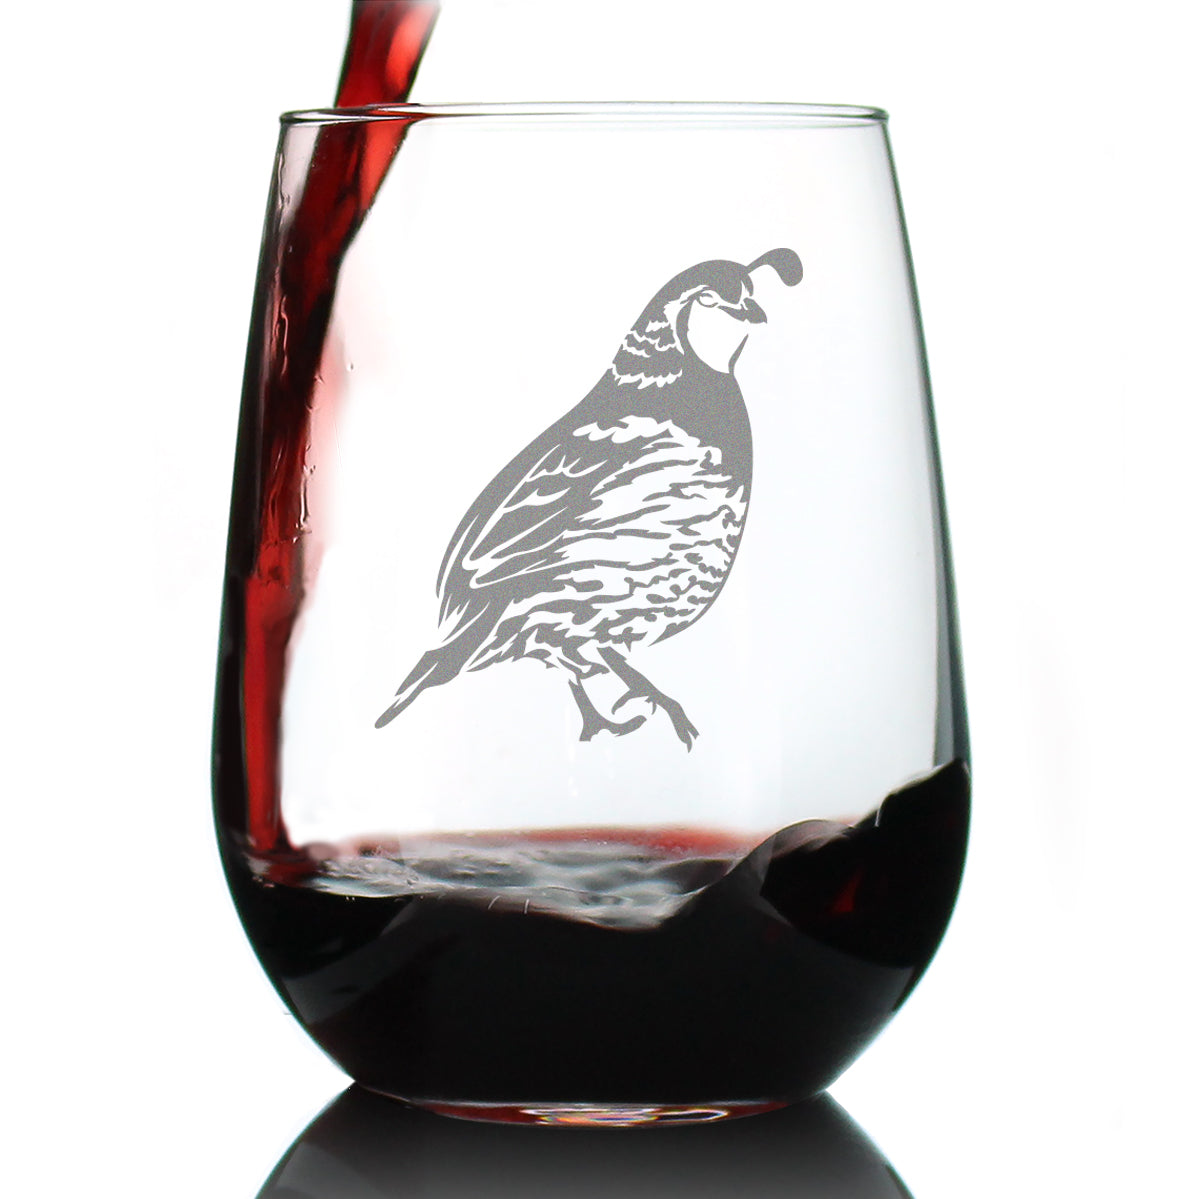 Quail Stemless Wine Glass - Fun Bird Themed Gifts and Decor for Men & Women - Large 17 Oz Glasses